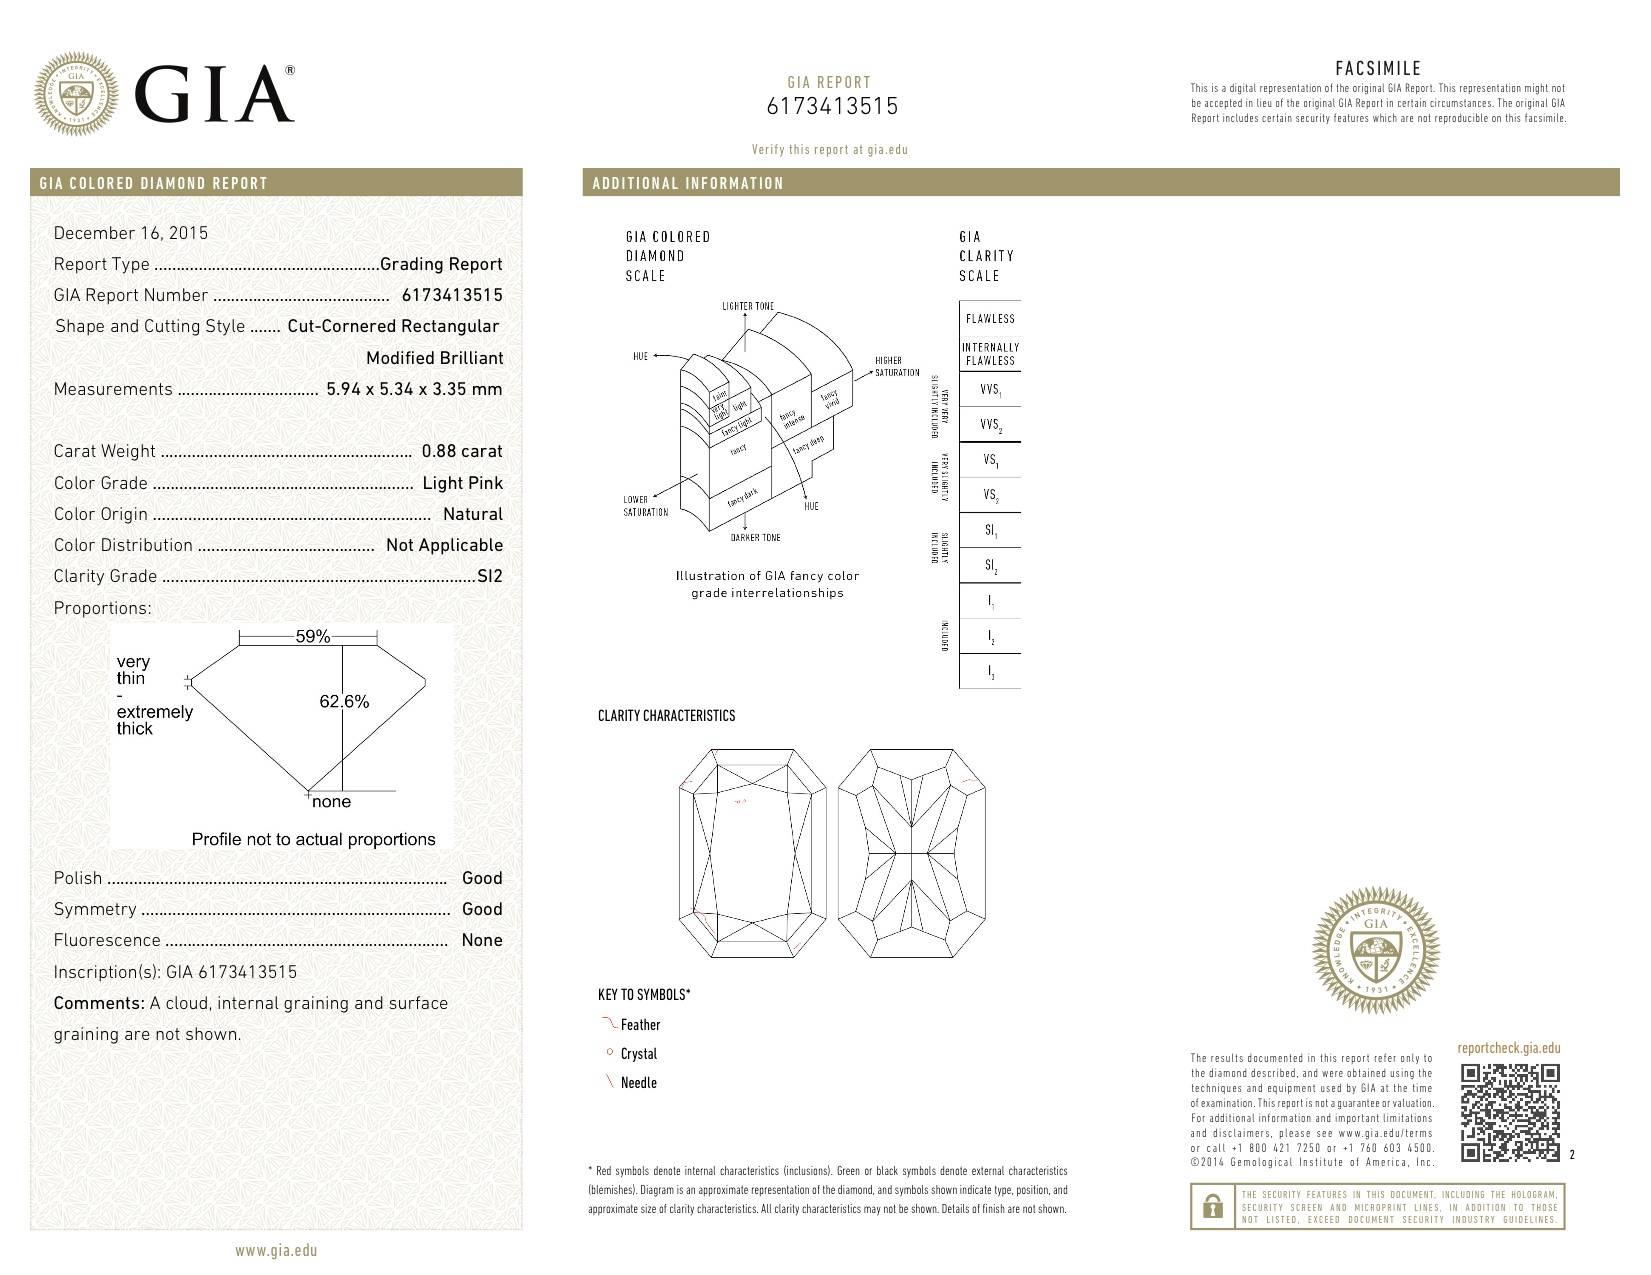 Rare and exquisite 0.88ct light pink radiant-cut diamond ring, accented by a pair of G/VS shield shape diamonds totaling 0.26ct, and G/VS round brilliant diamonds totaling 1.06ct.
G.I.A certificate attached.
Hand crafted in 18K white and rose gold